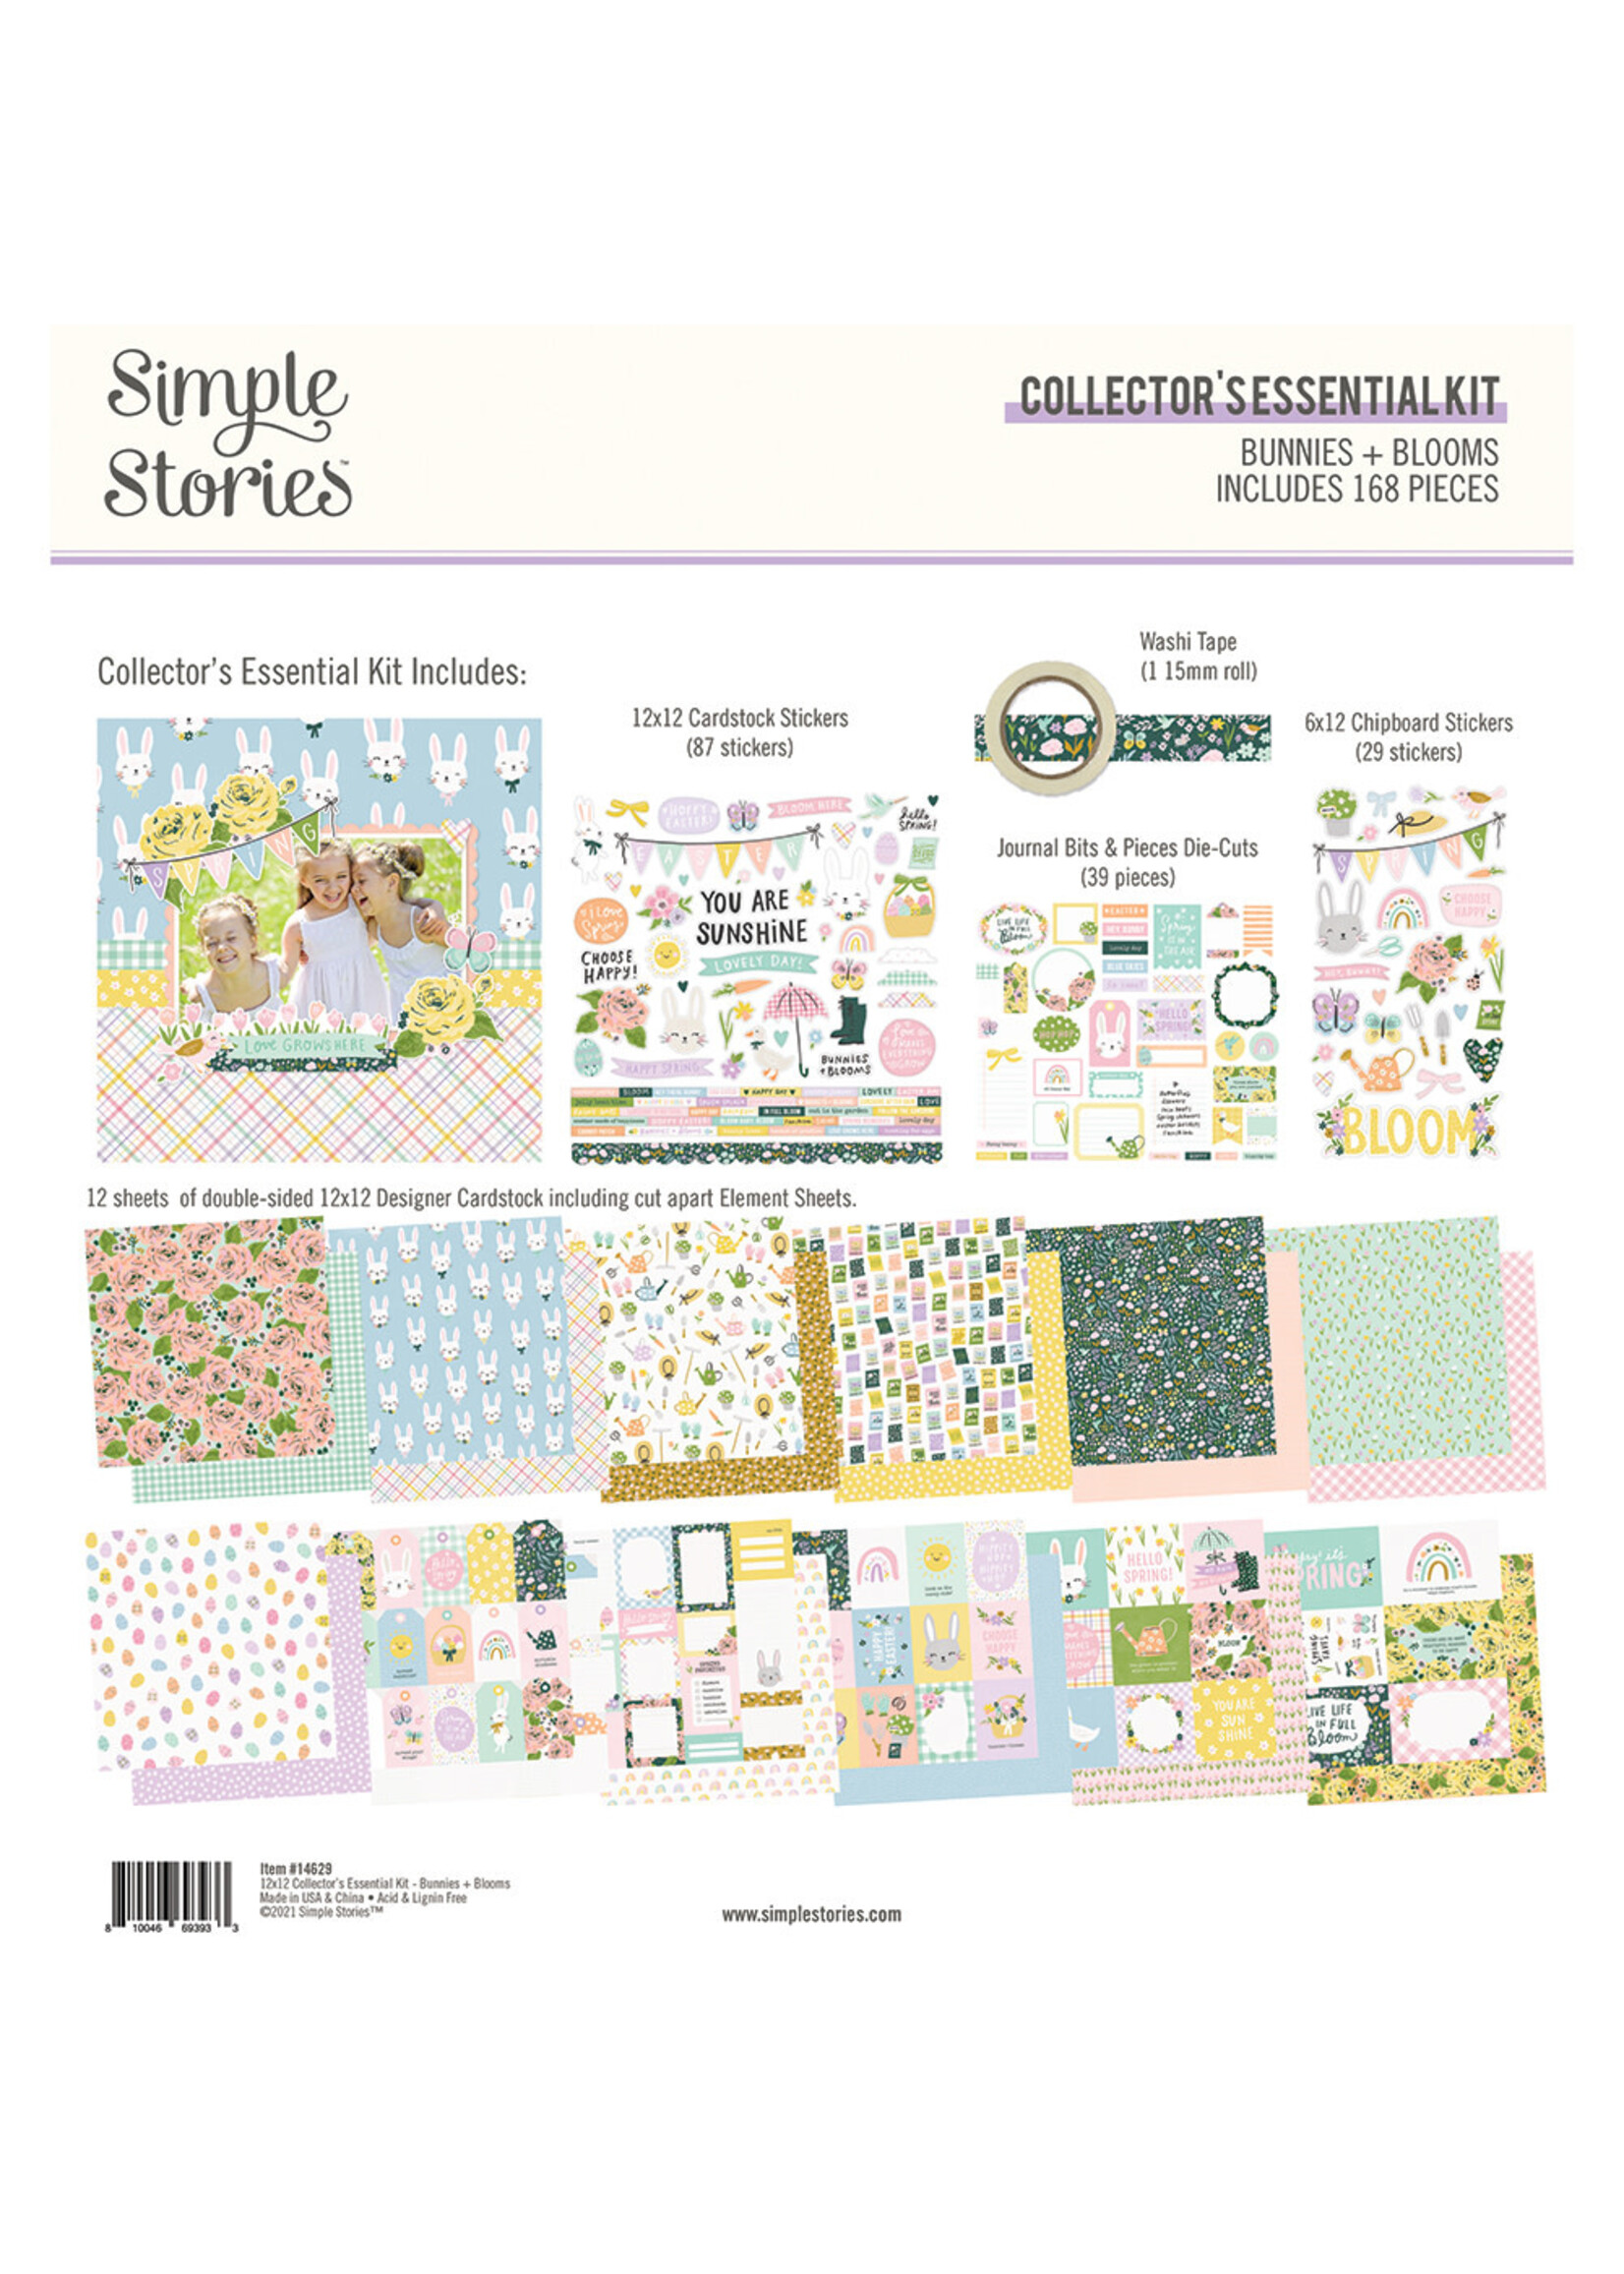 Simple Stories Bunnies + Blooms - Collector's Essential Kit